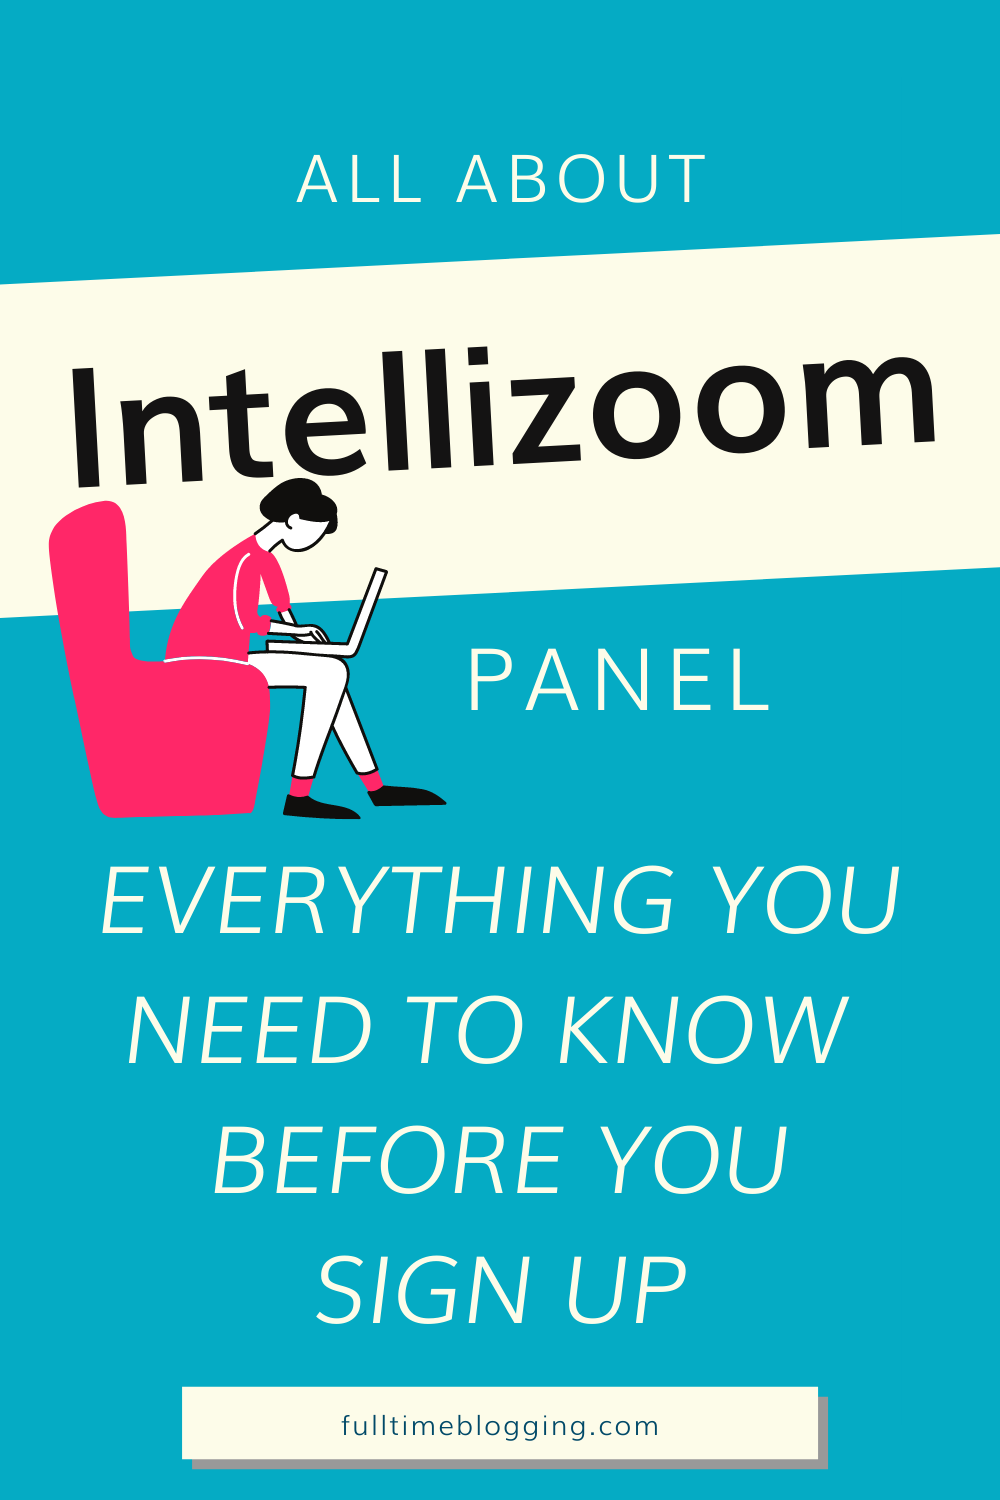 about intellizoom panel